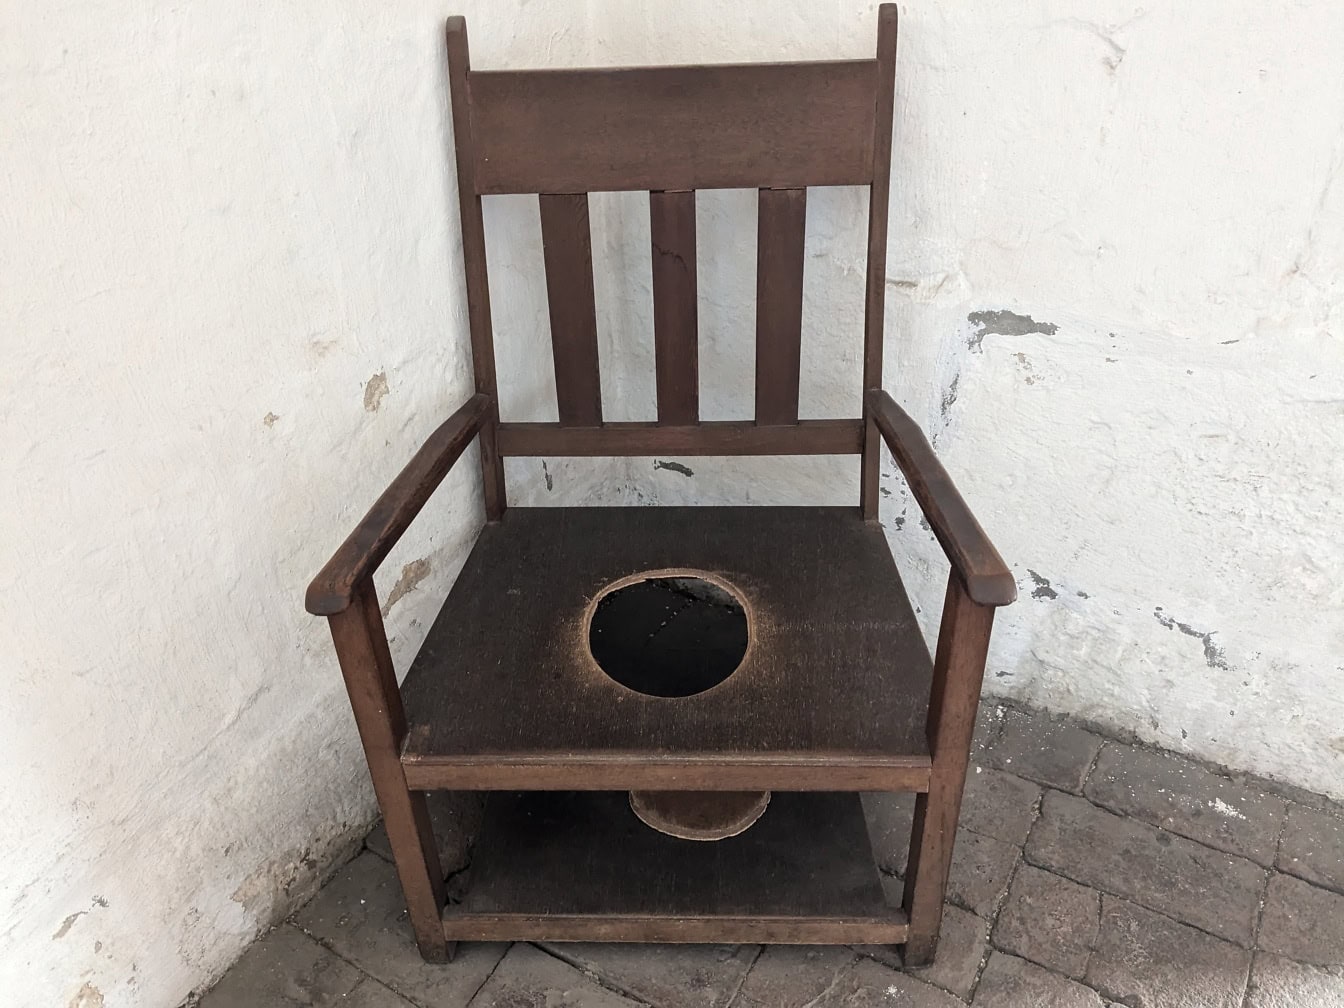 Old wooden chair with a hole in the middle used as toilet n Santa Catalina monastery in Arequipa in Peru